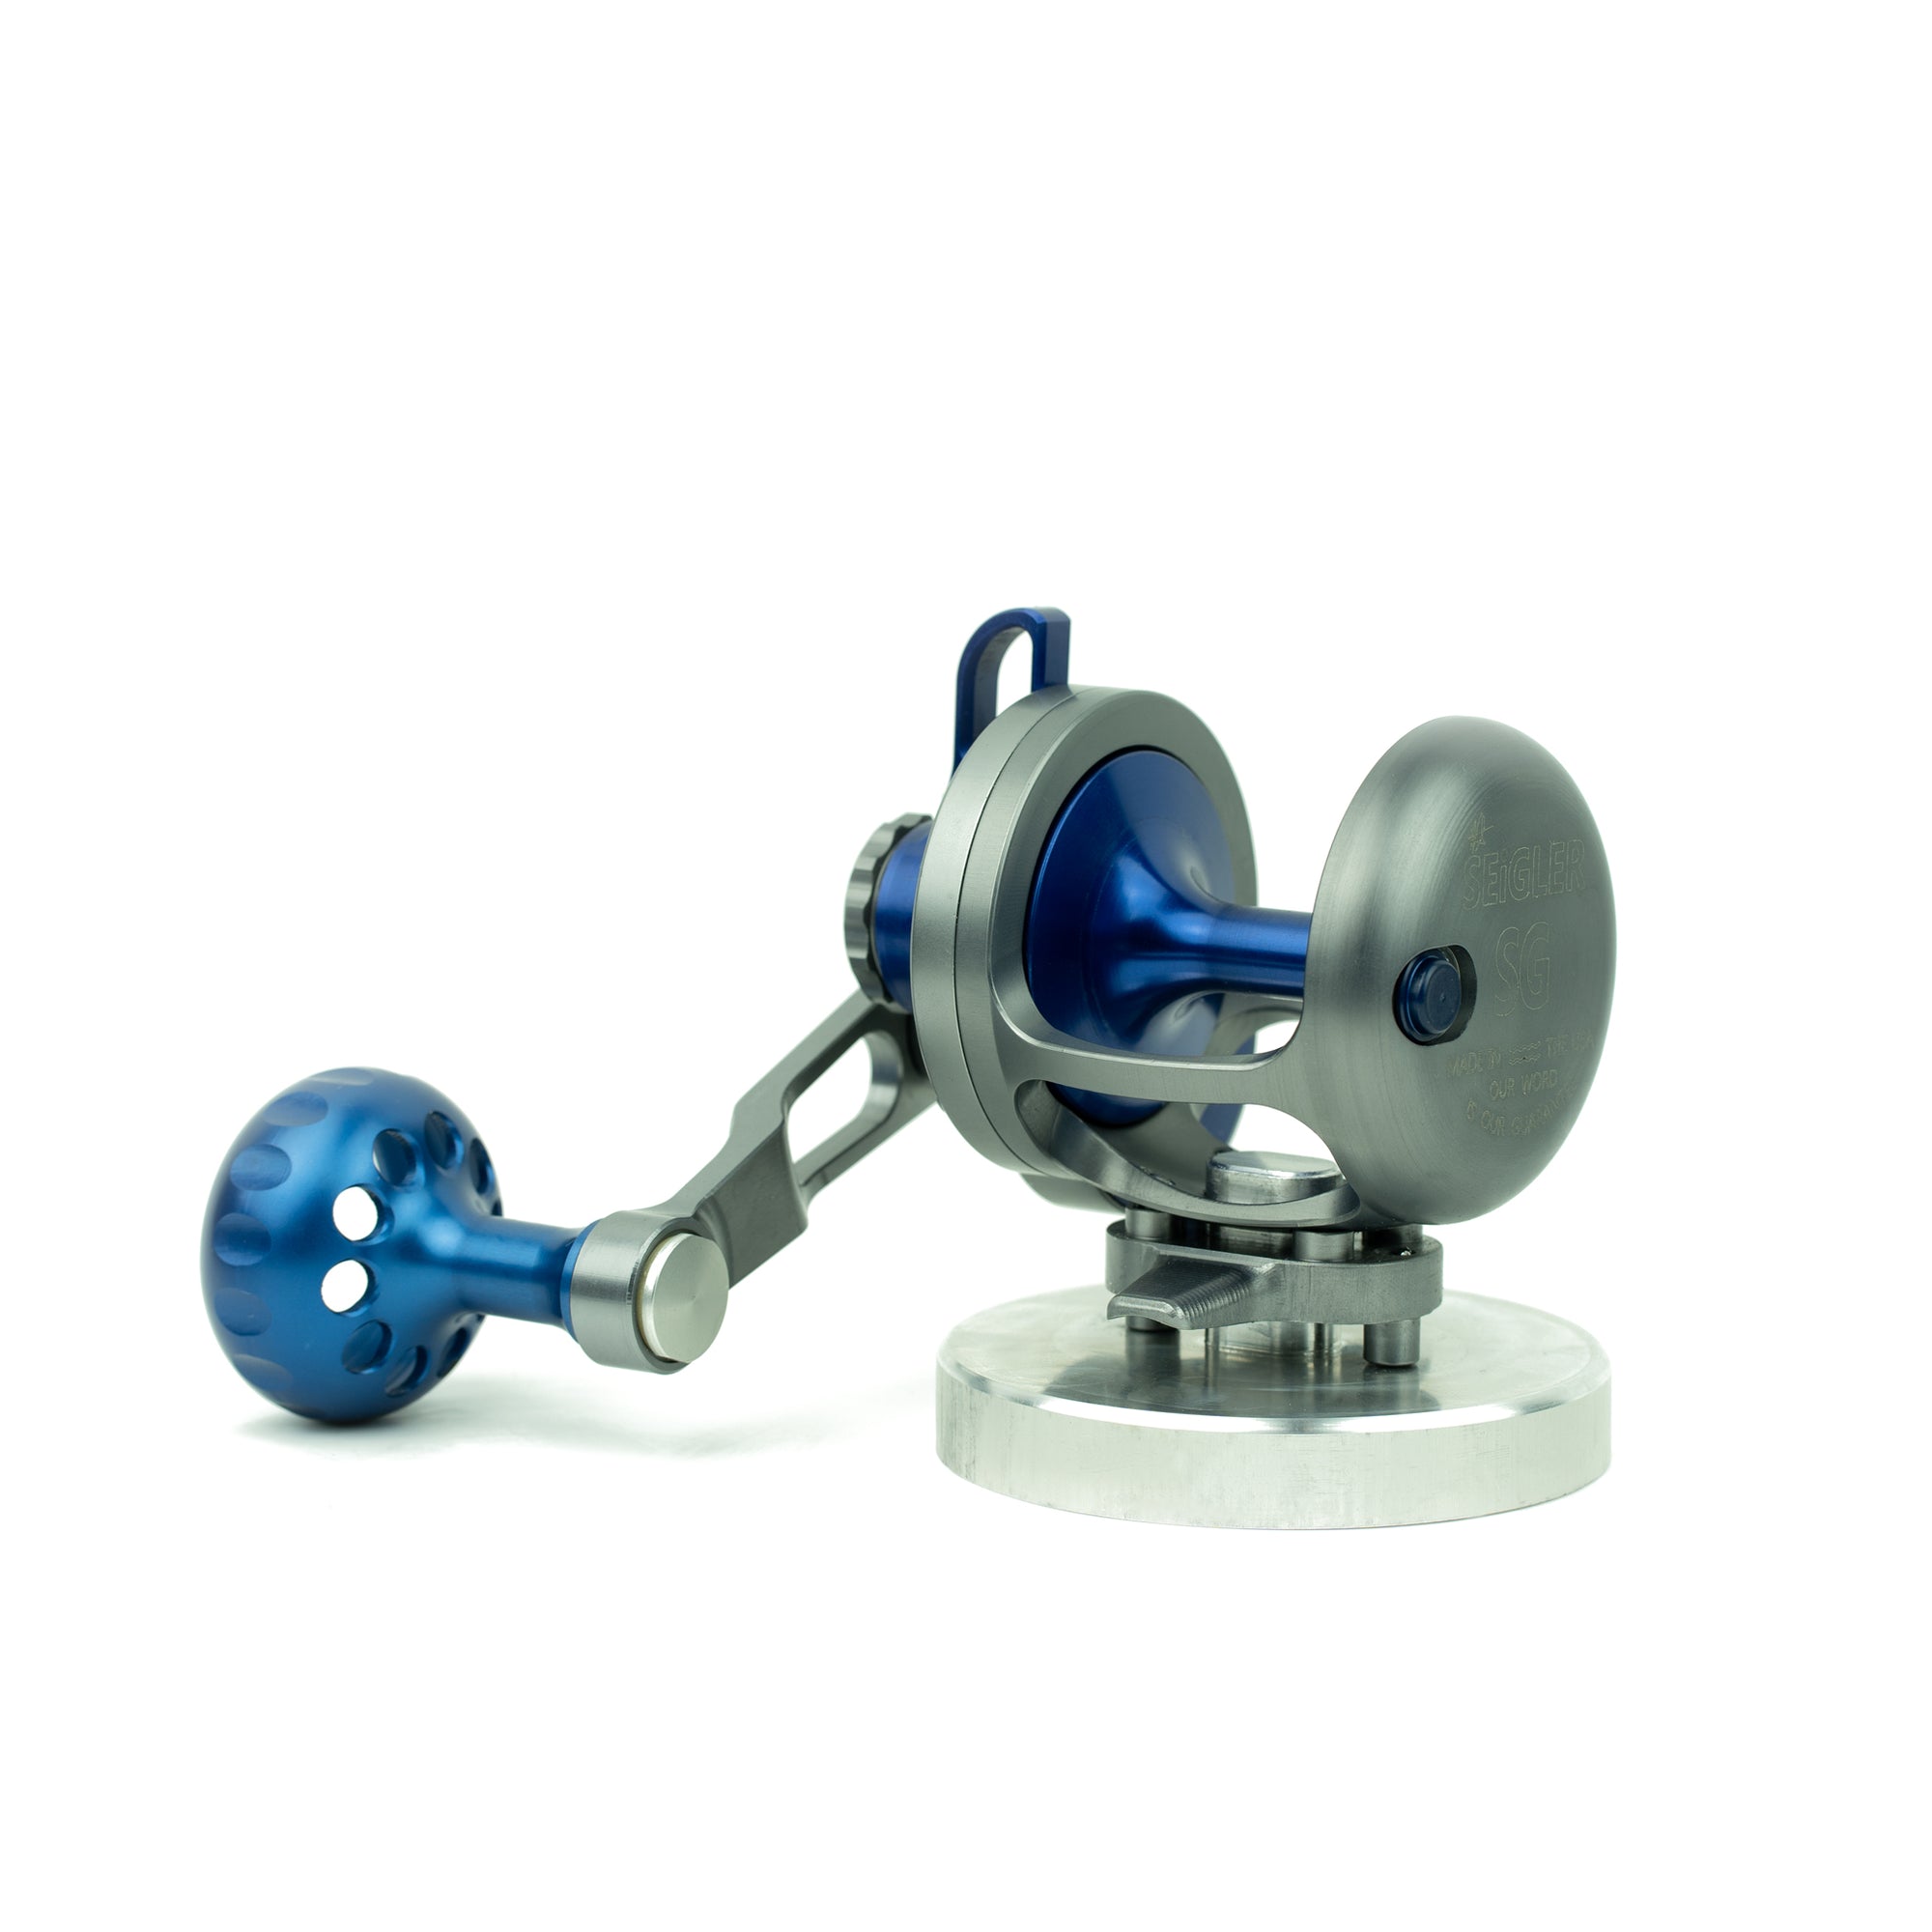 Reel stand for Seigler conventional fishing reels.